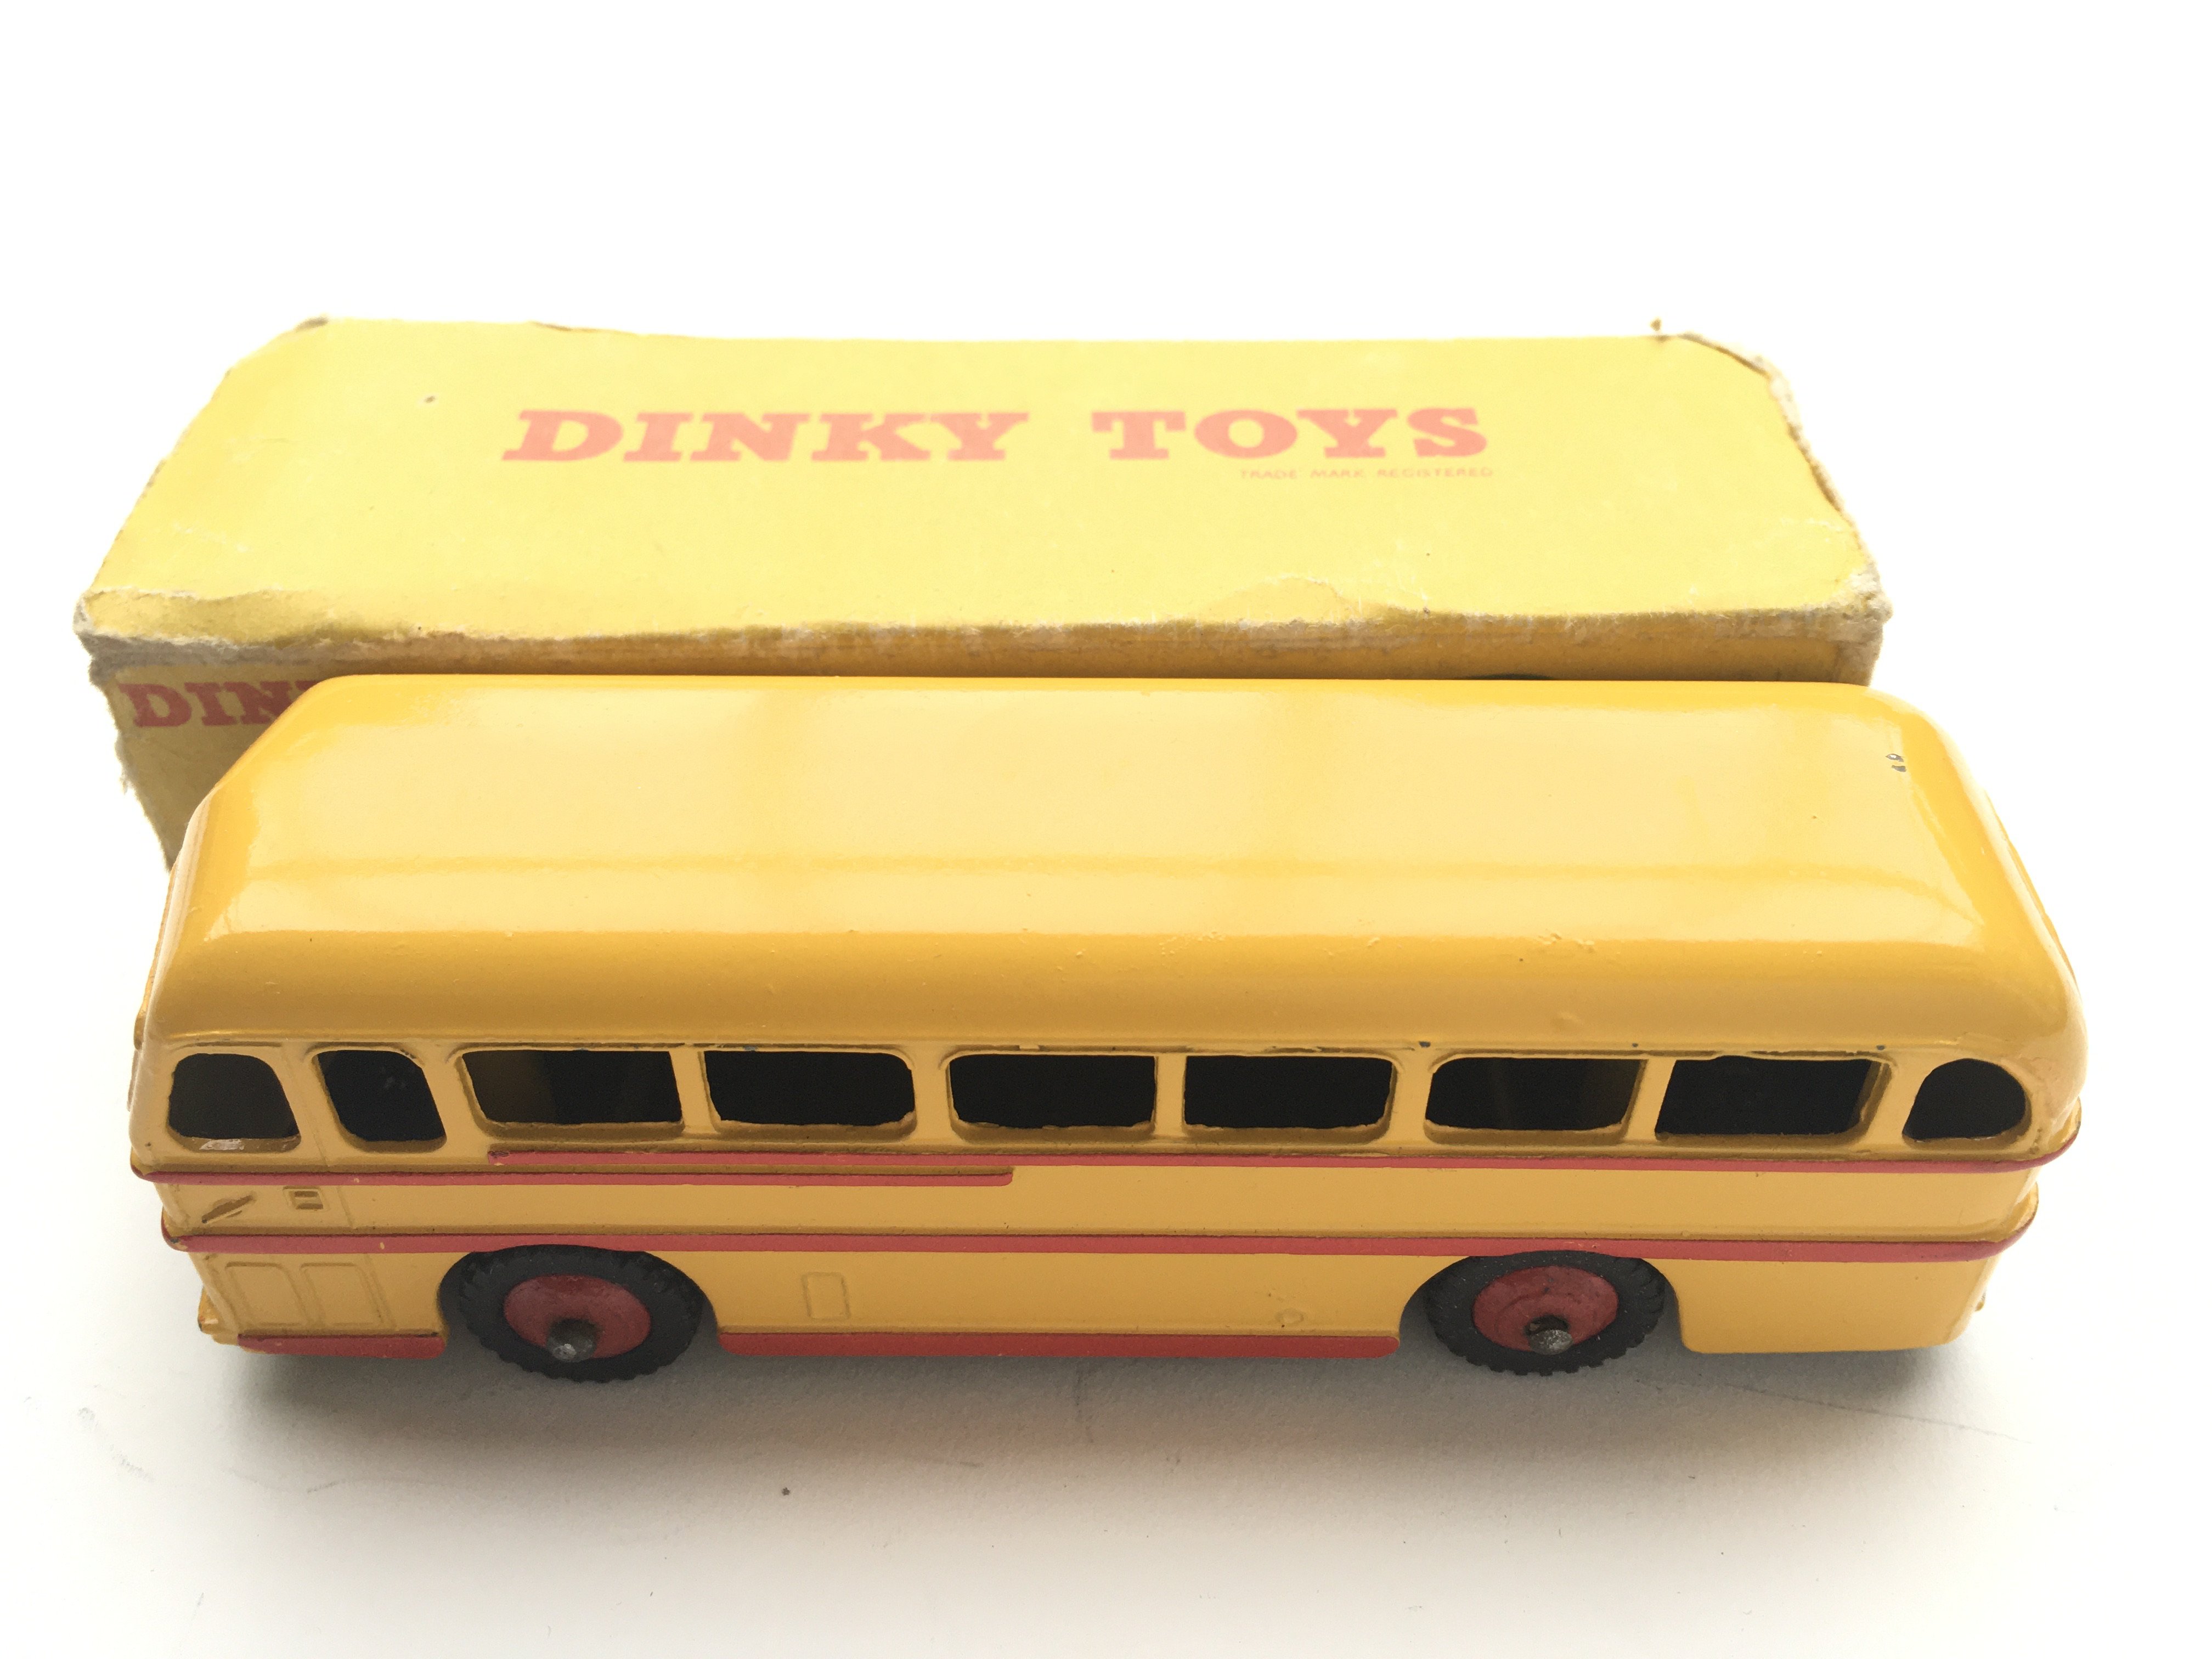 A Dinky Double Deck bus #290, a Dinky London bus # - Image 2 of 5